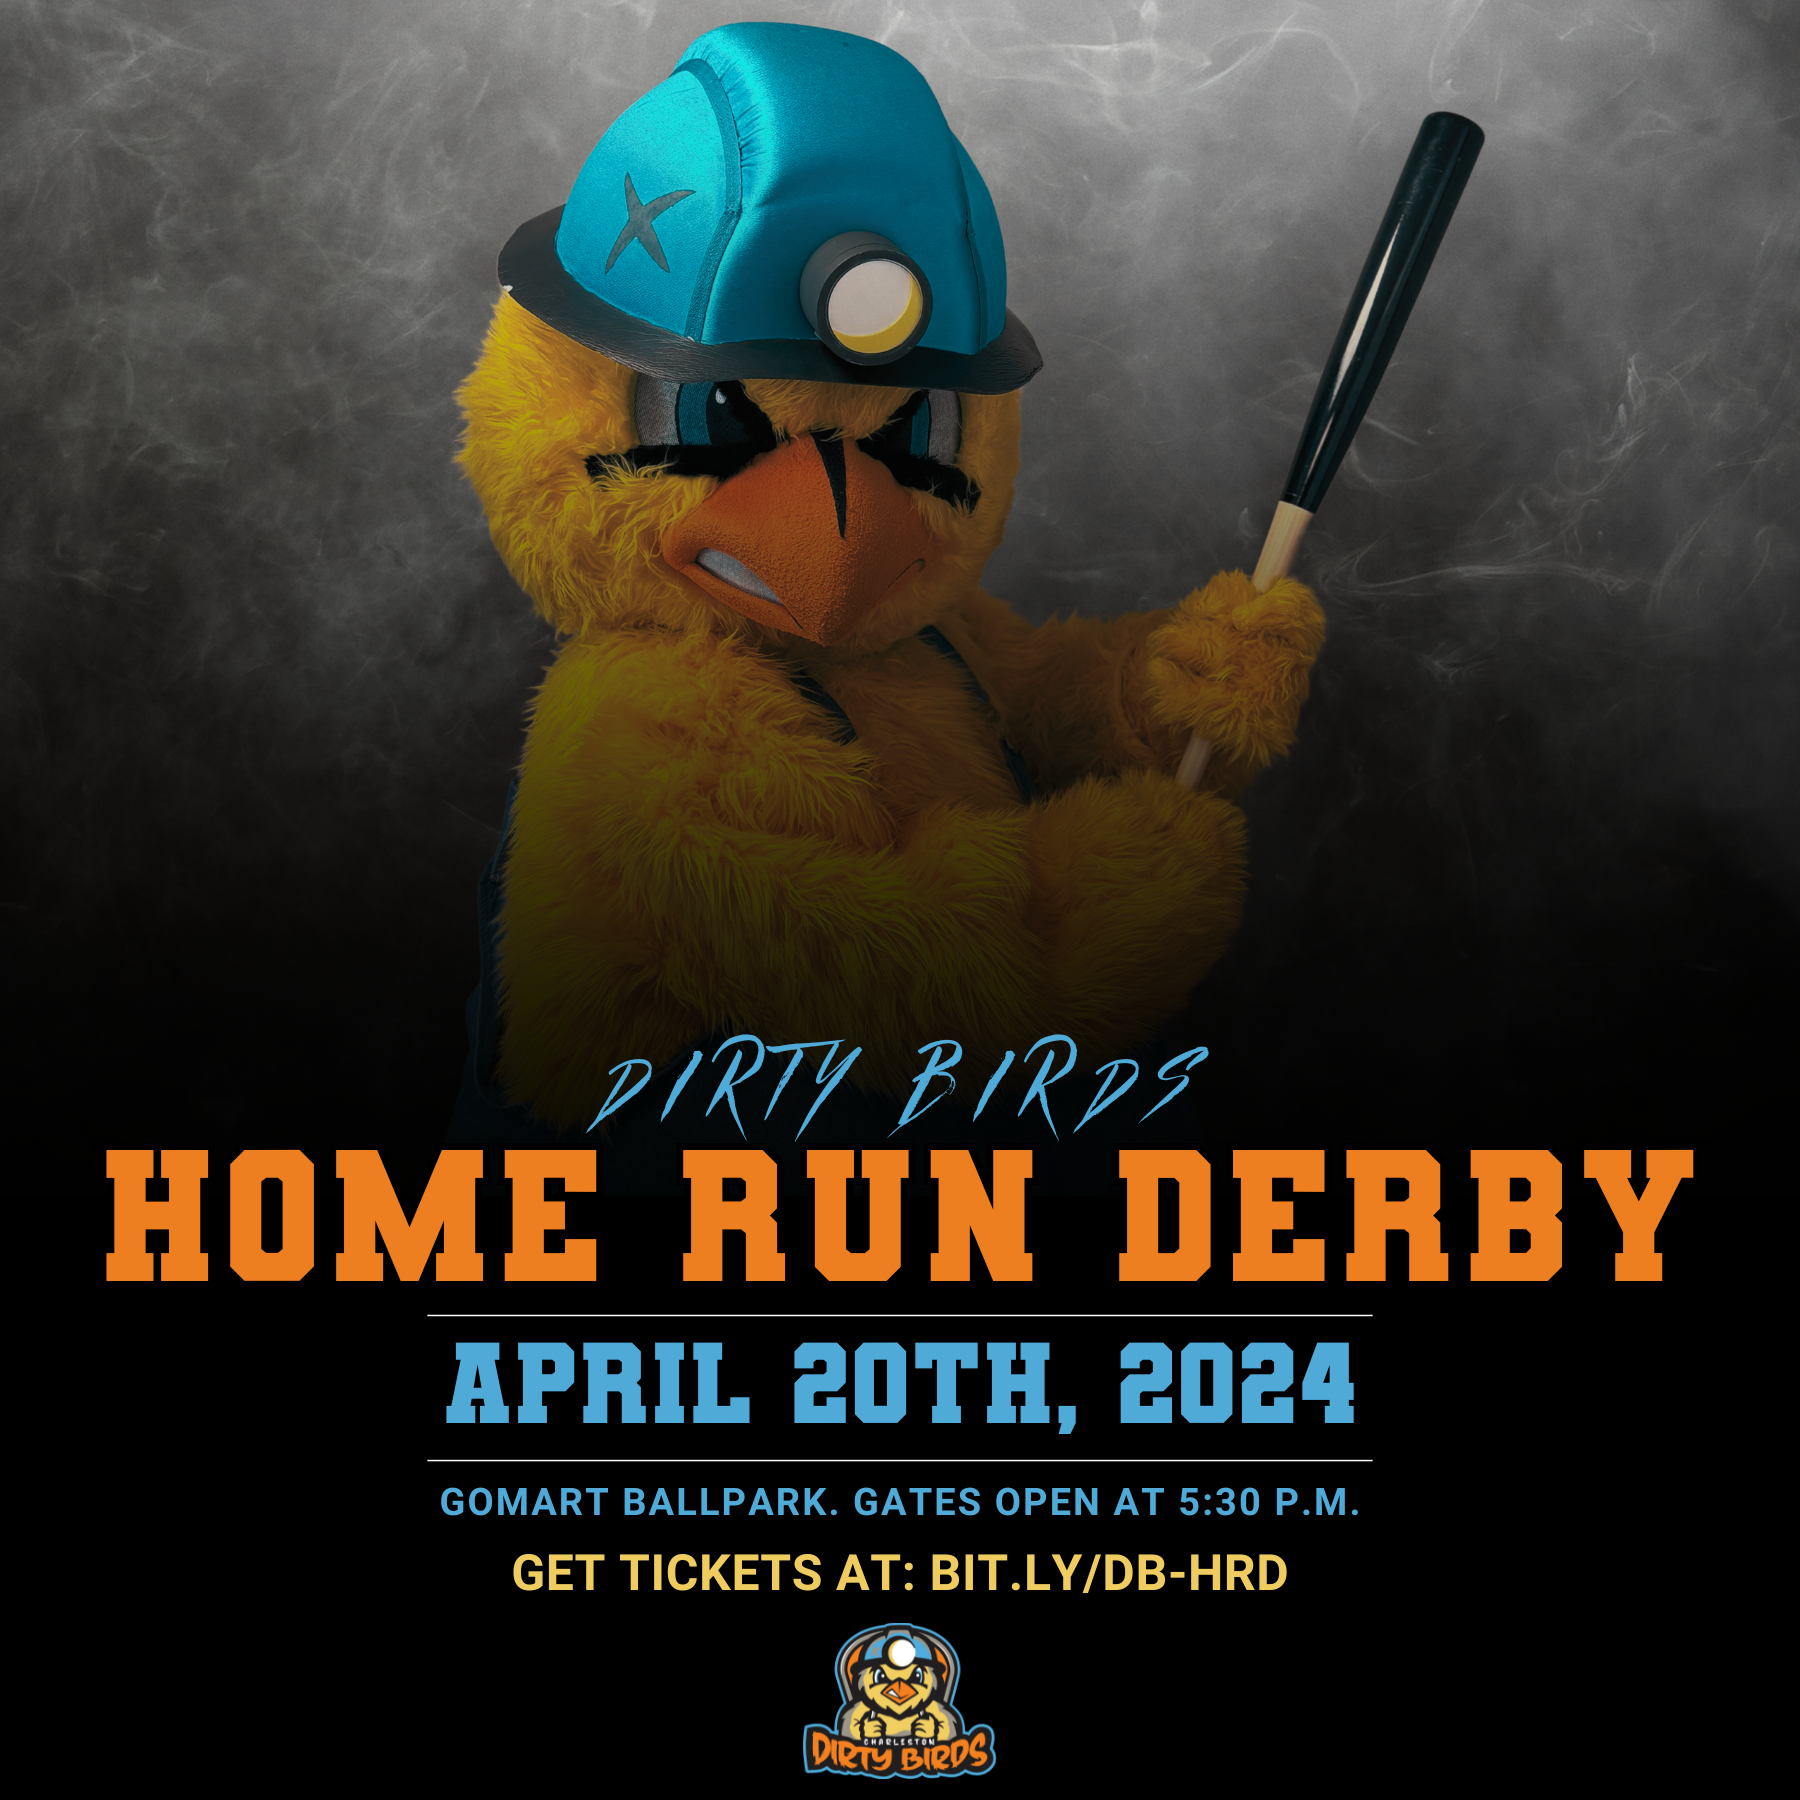 CHARLESTON DIRTY BIRDS TO HOST HOME RUN DERBY ON APRIL 20